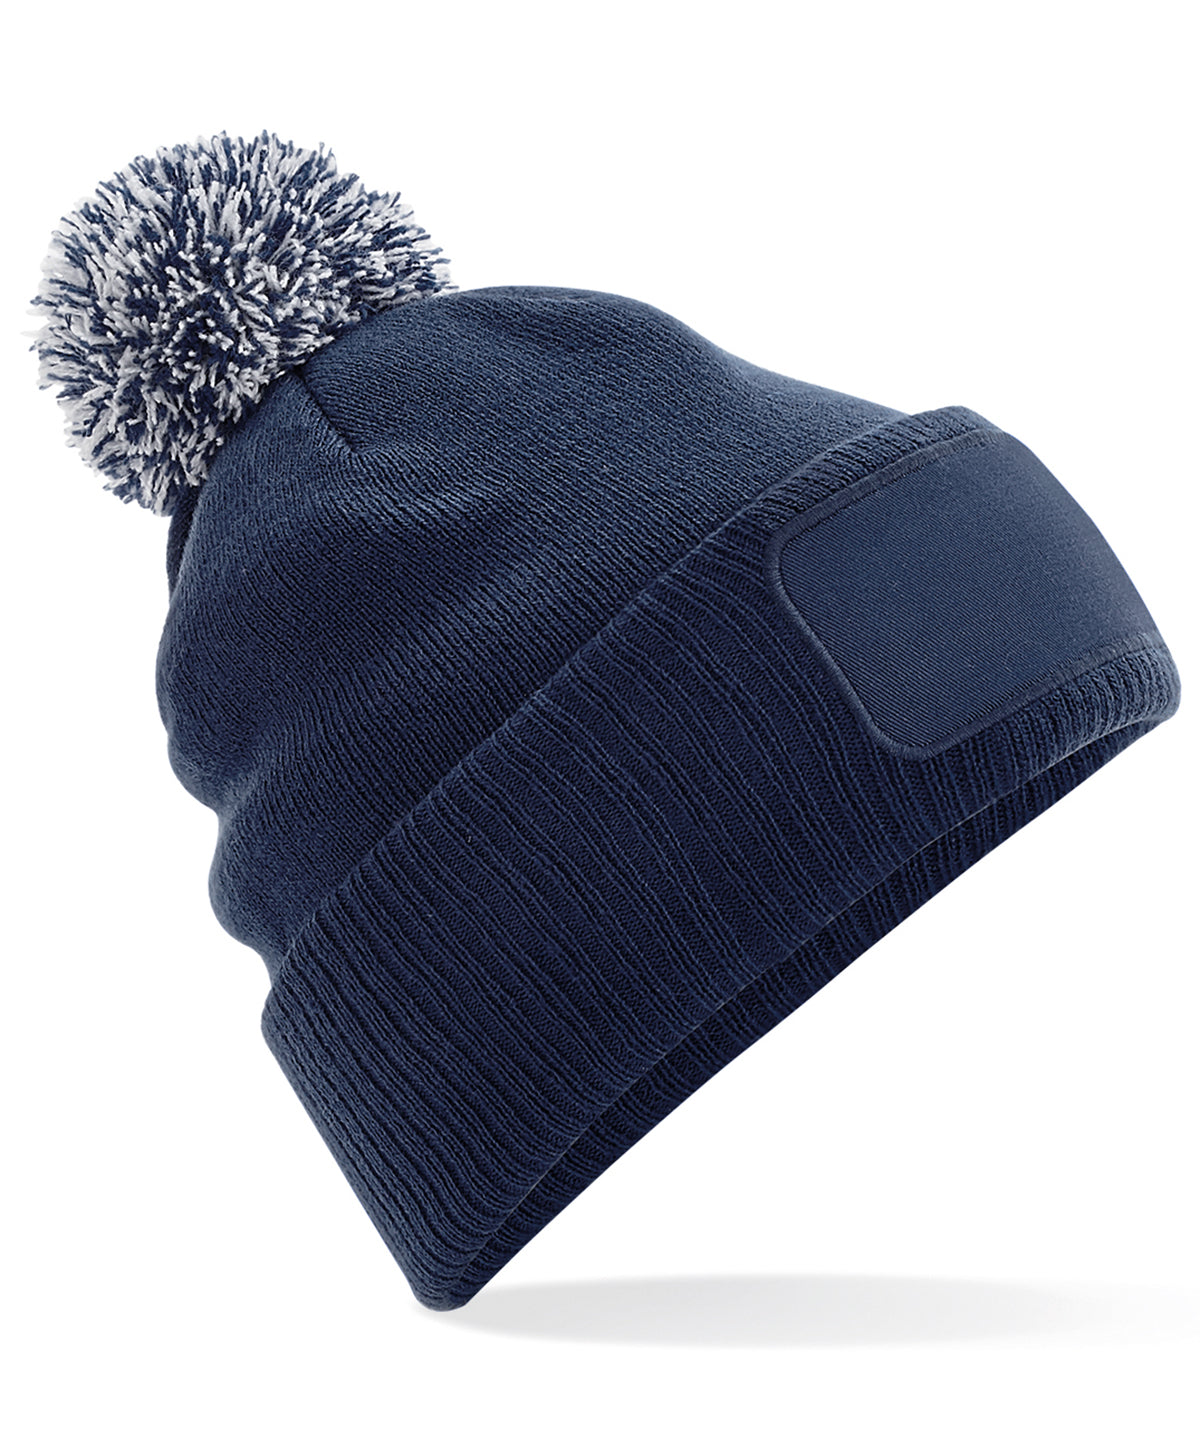 Personalised Hats - Navy Beechfield Snowstar® patch beanie